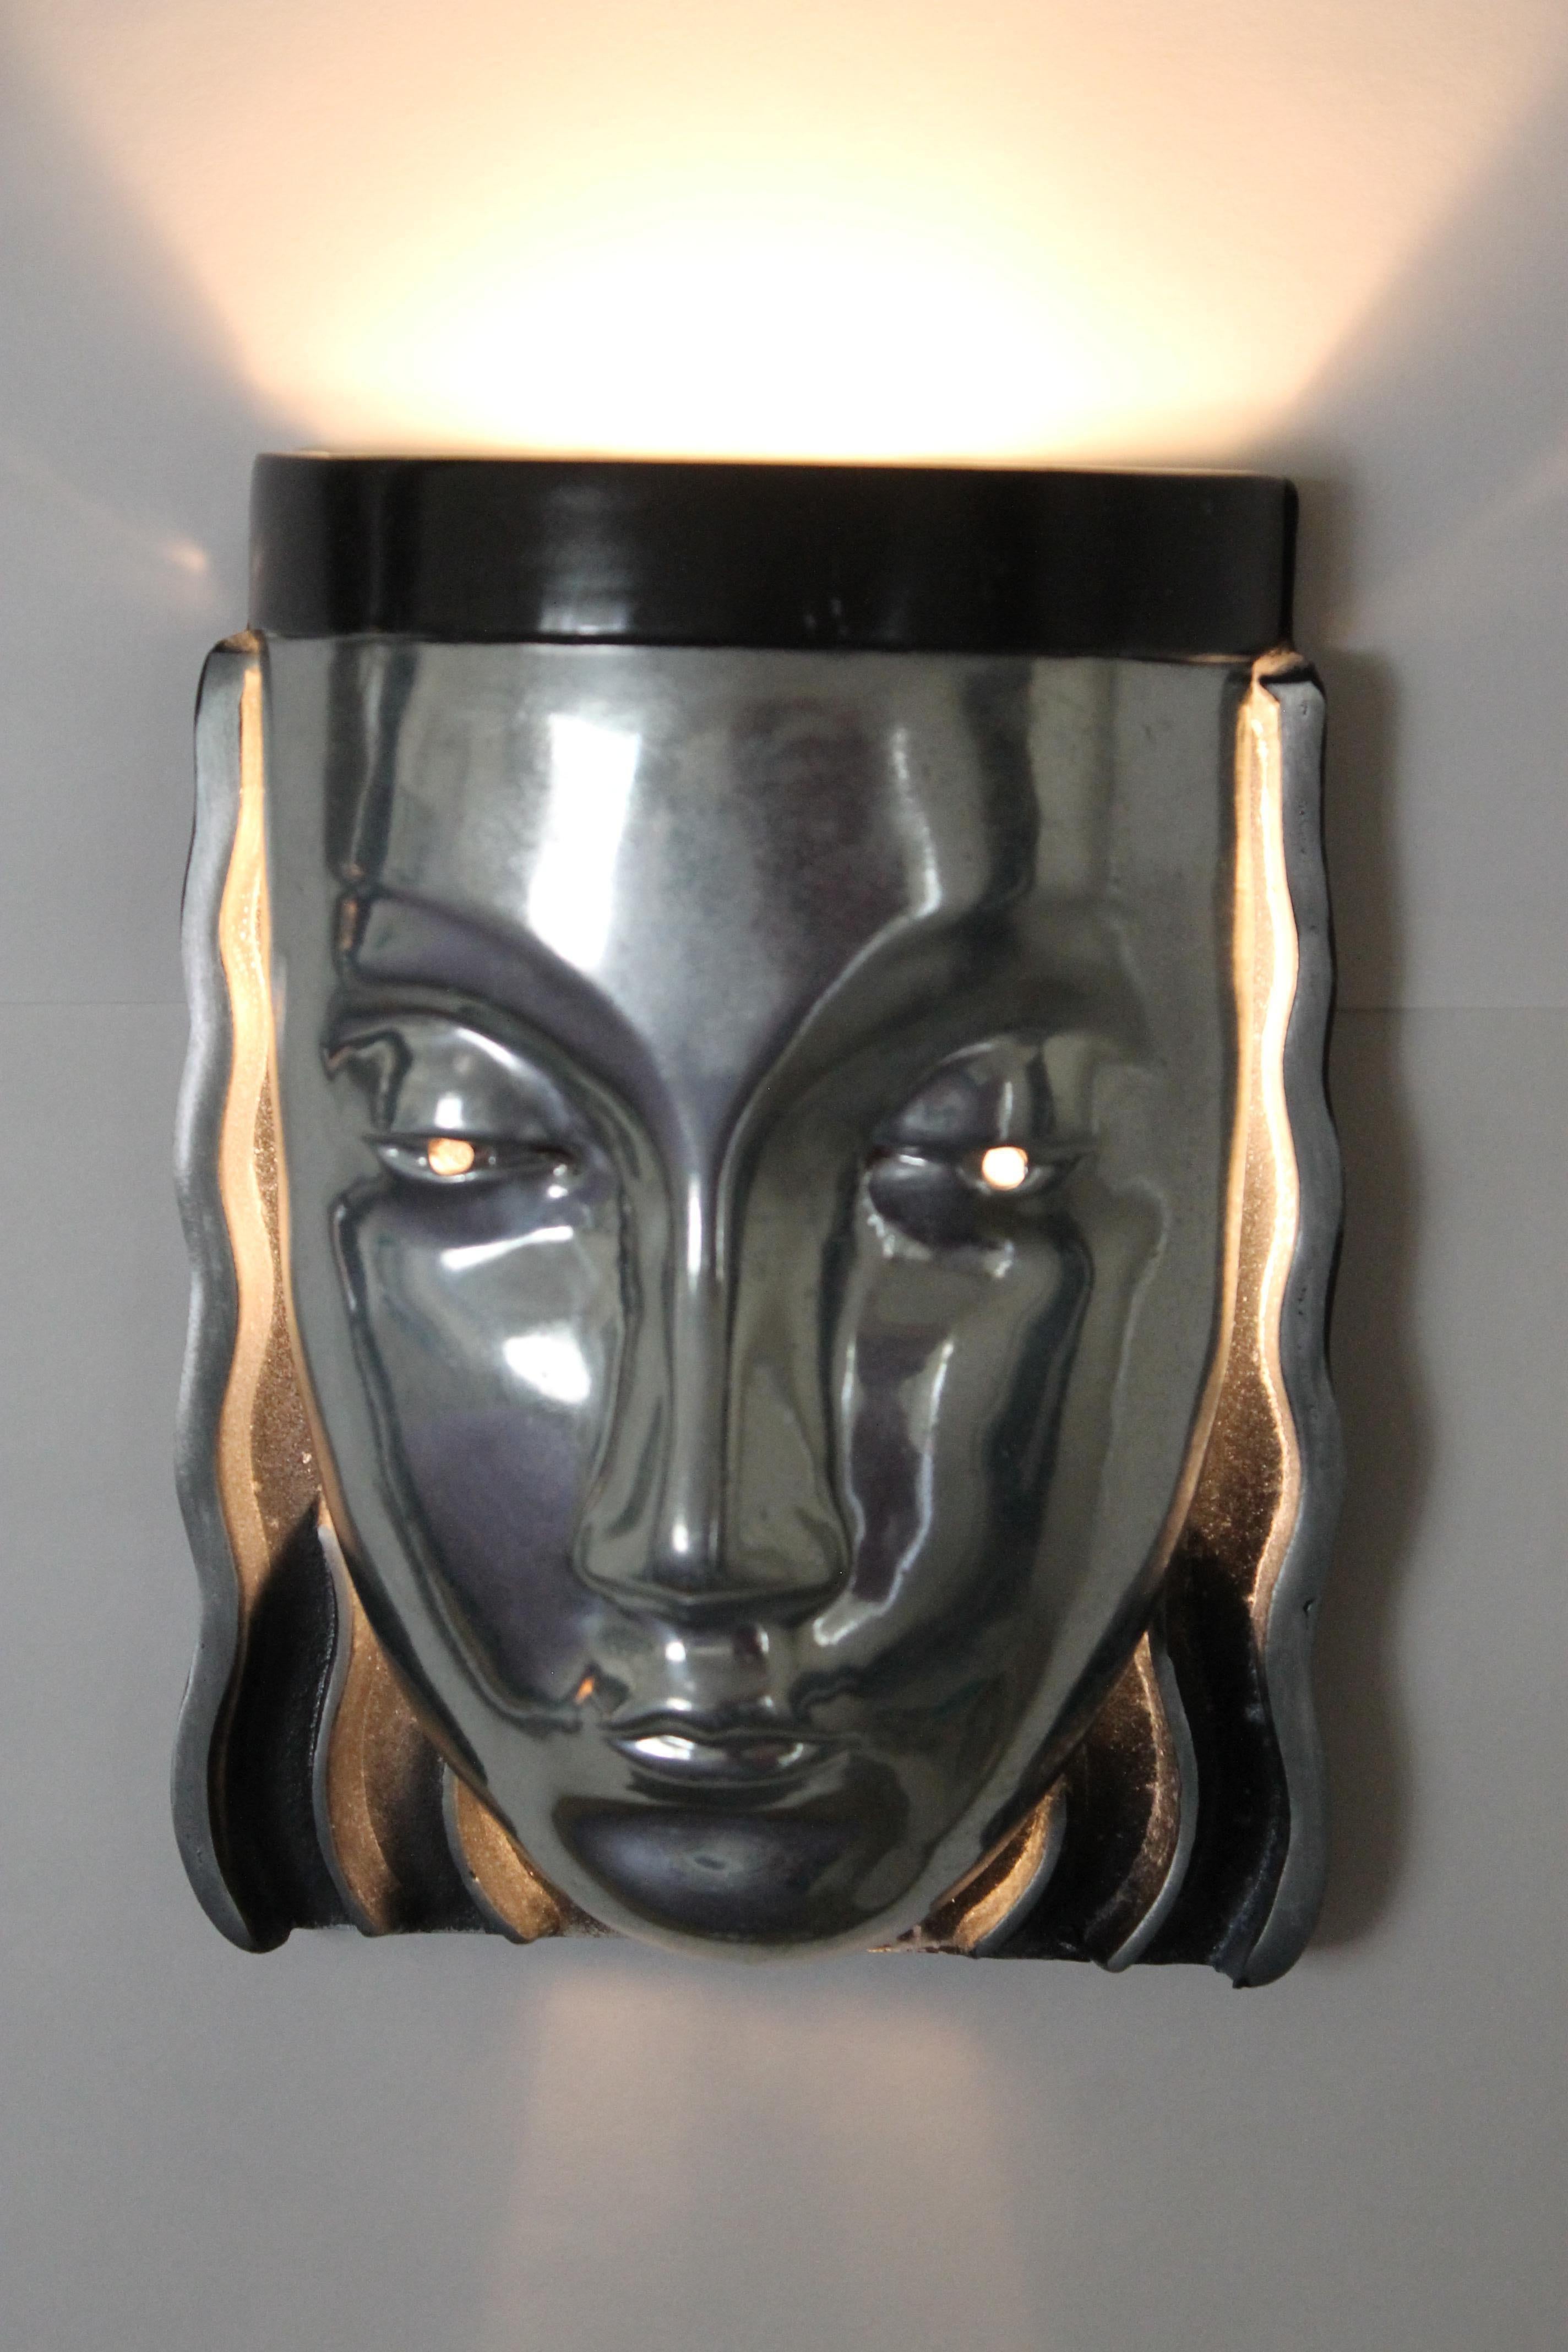 A pair of cast aluminum Art Deco style face sconces by Sarsaparilla Company, circa 1982. Light shines mainly upwards but also downwards through the hair. Great dramatic affect. Matched pair, excellent working condition measuring 6